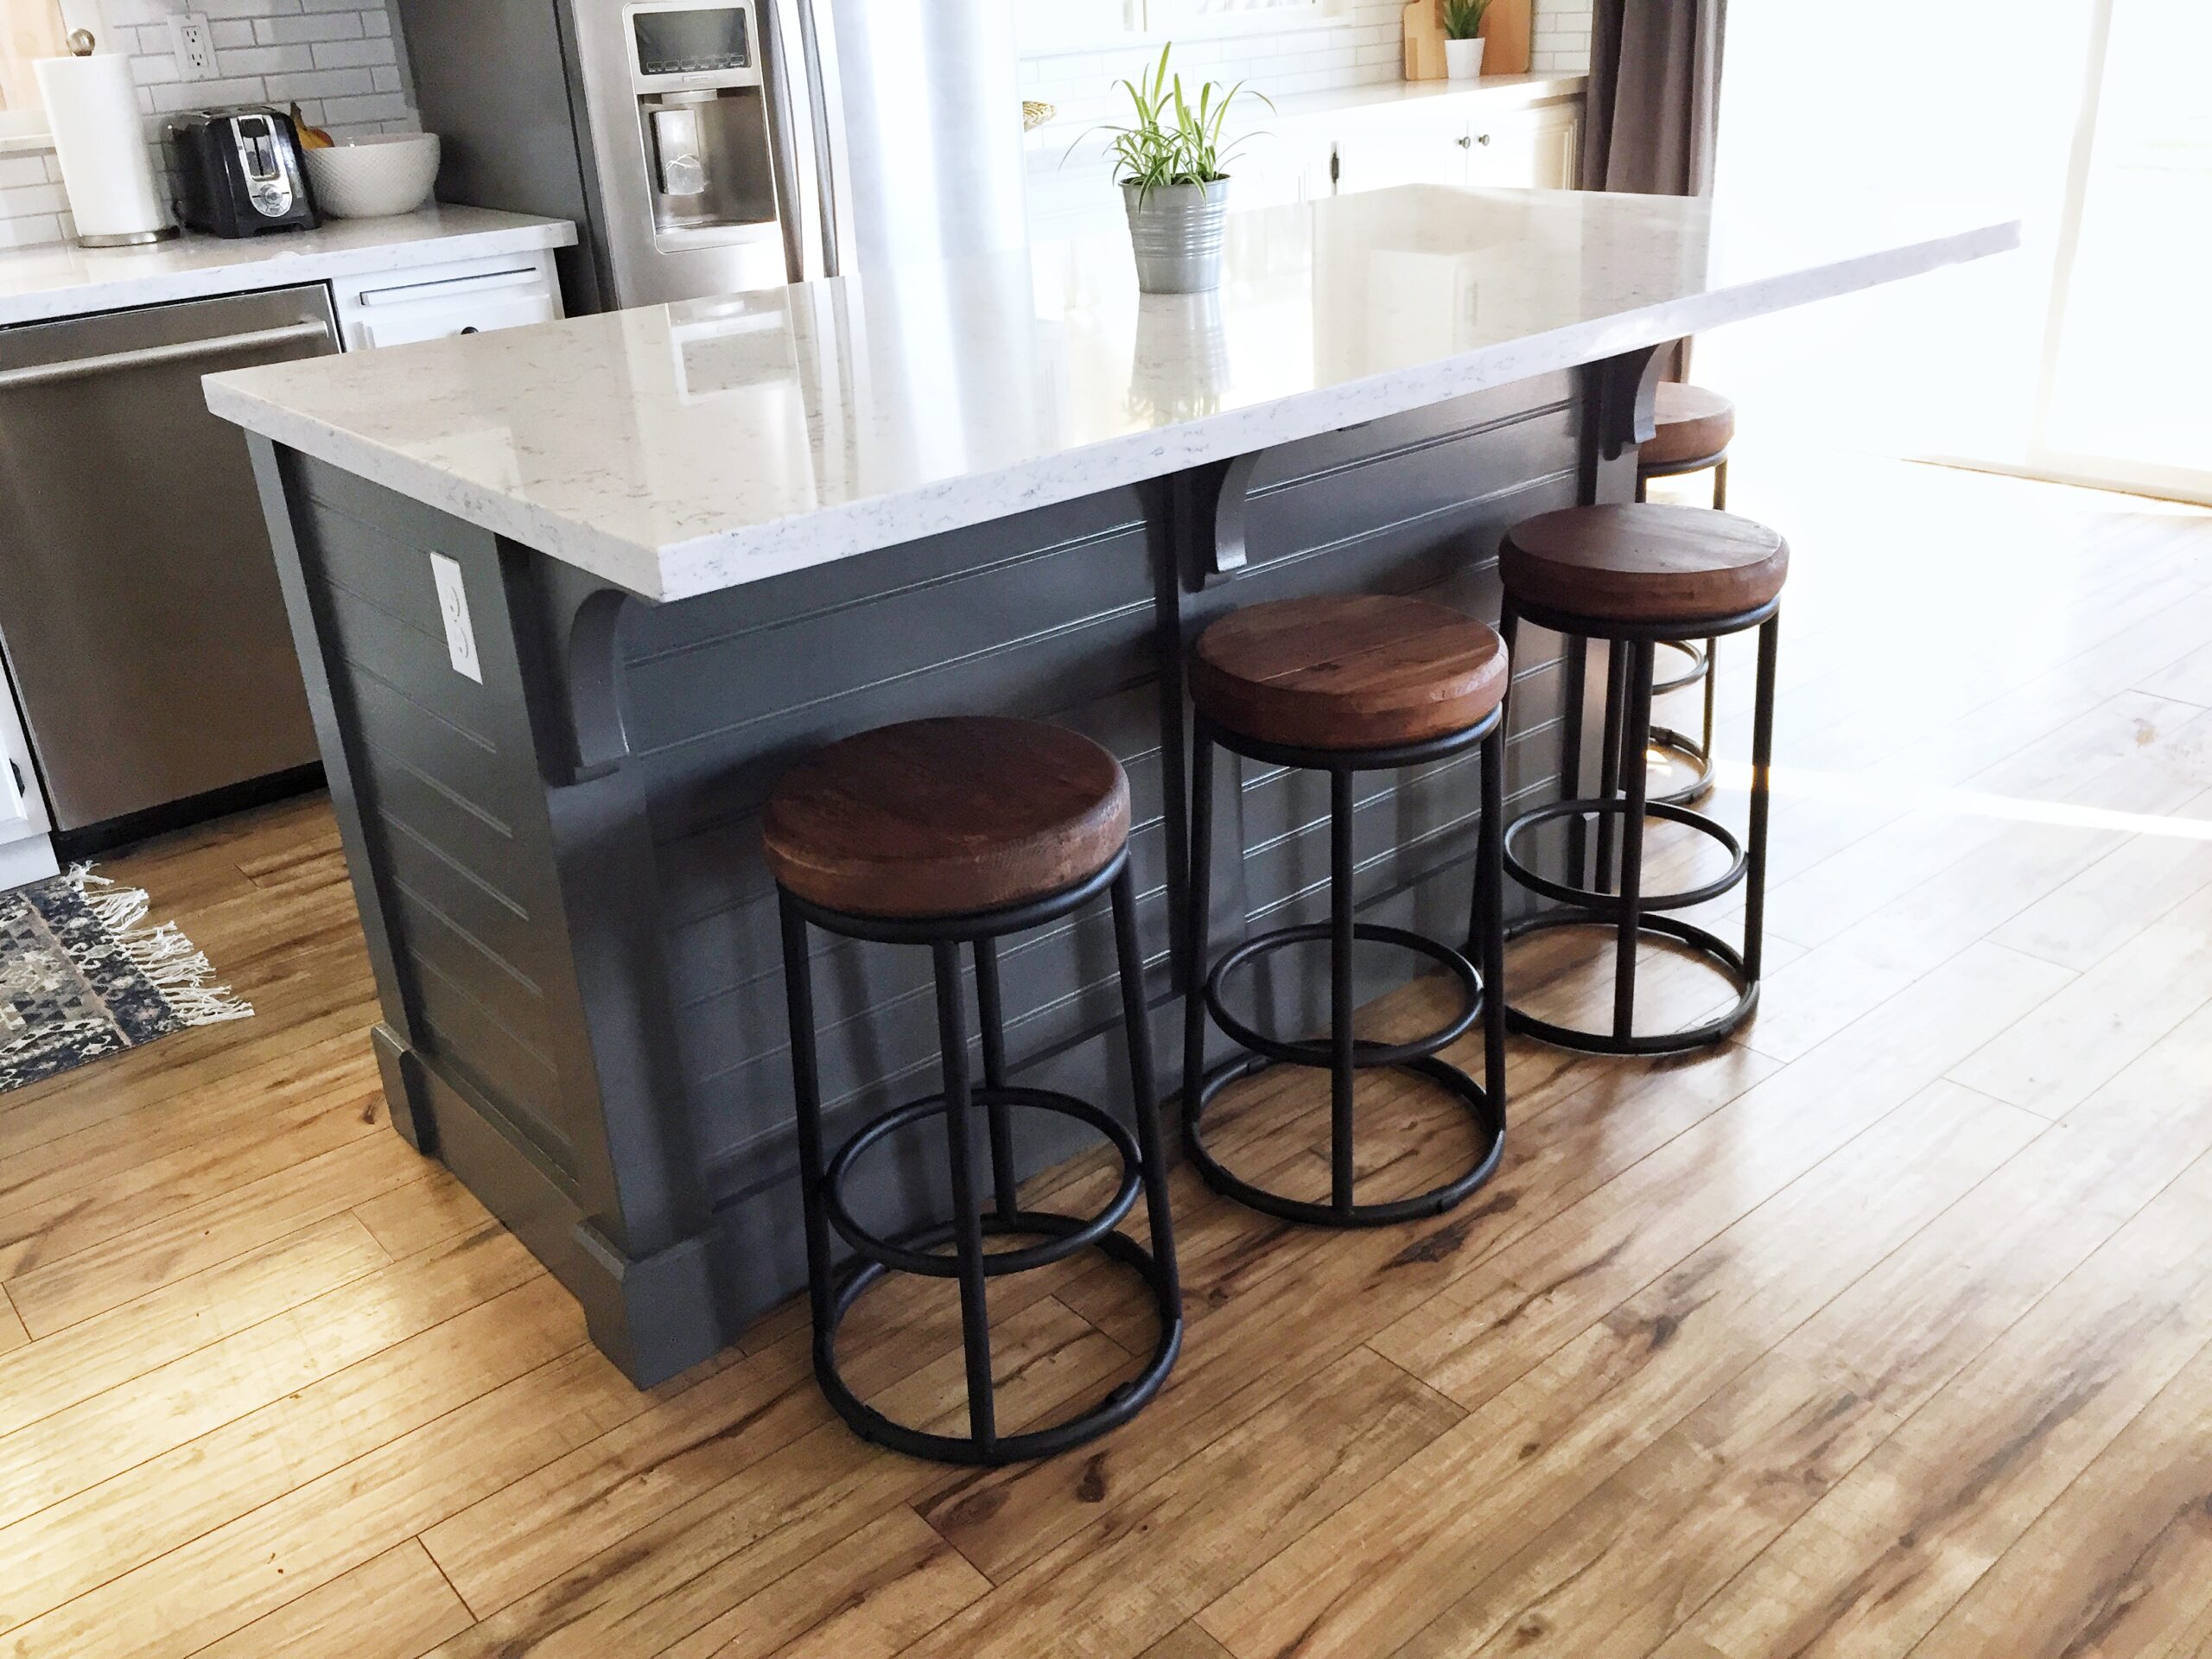 Feud Choice Snooze A DIY Kitchen Island: Make it yourself and Save Big! | Domestic Blonde